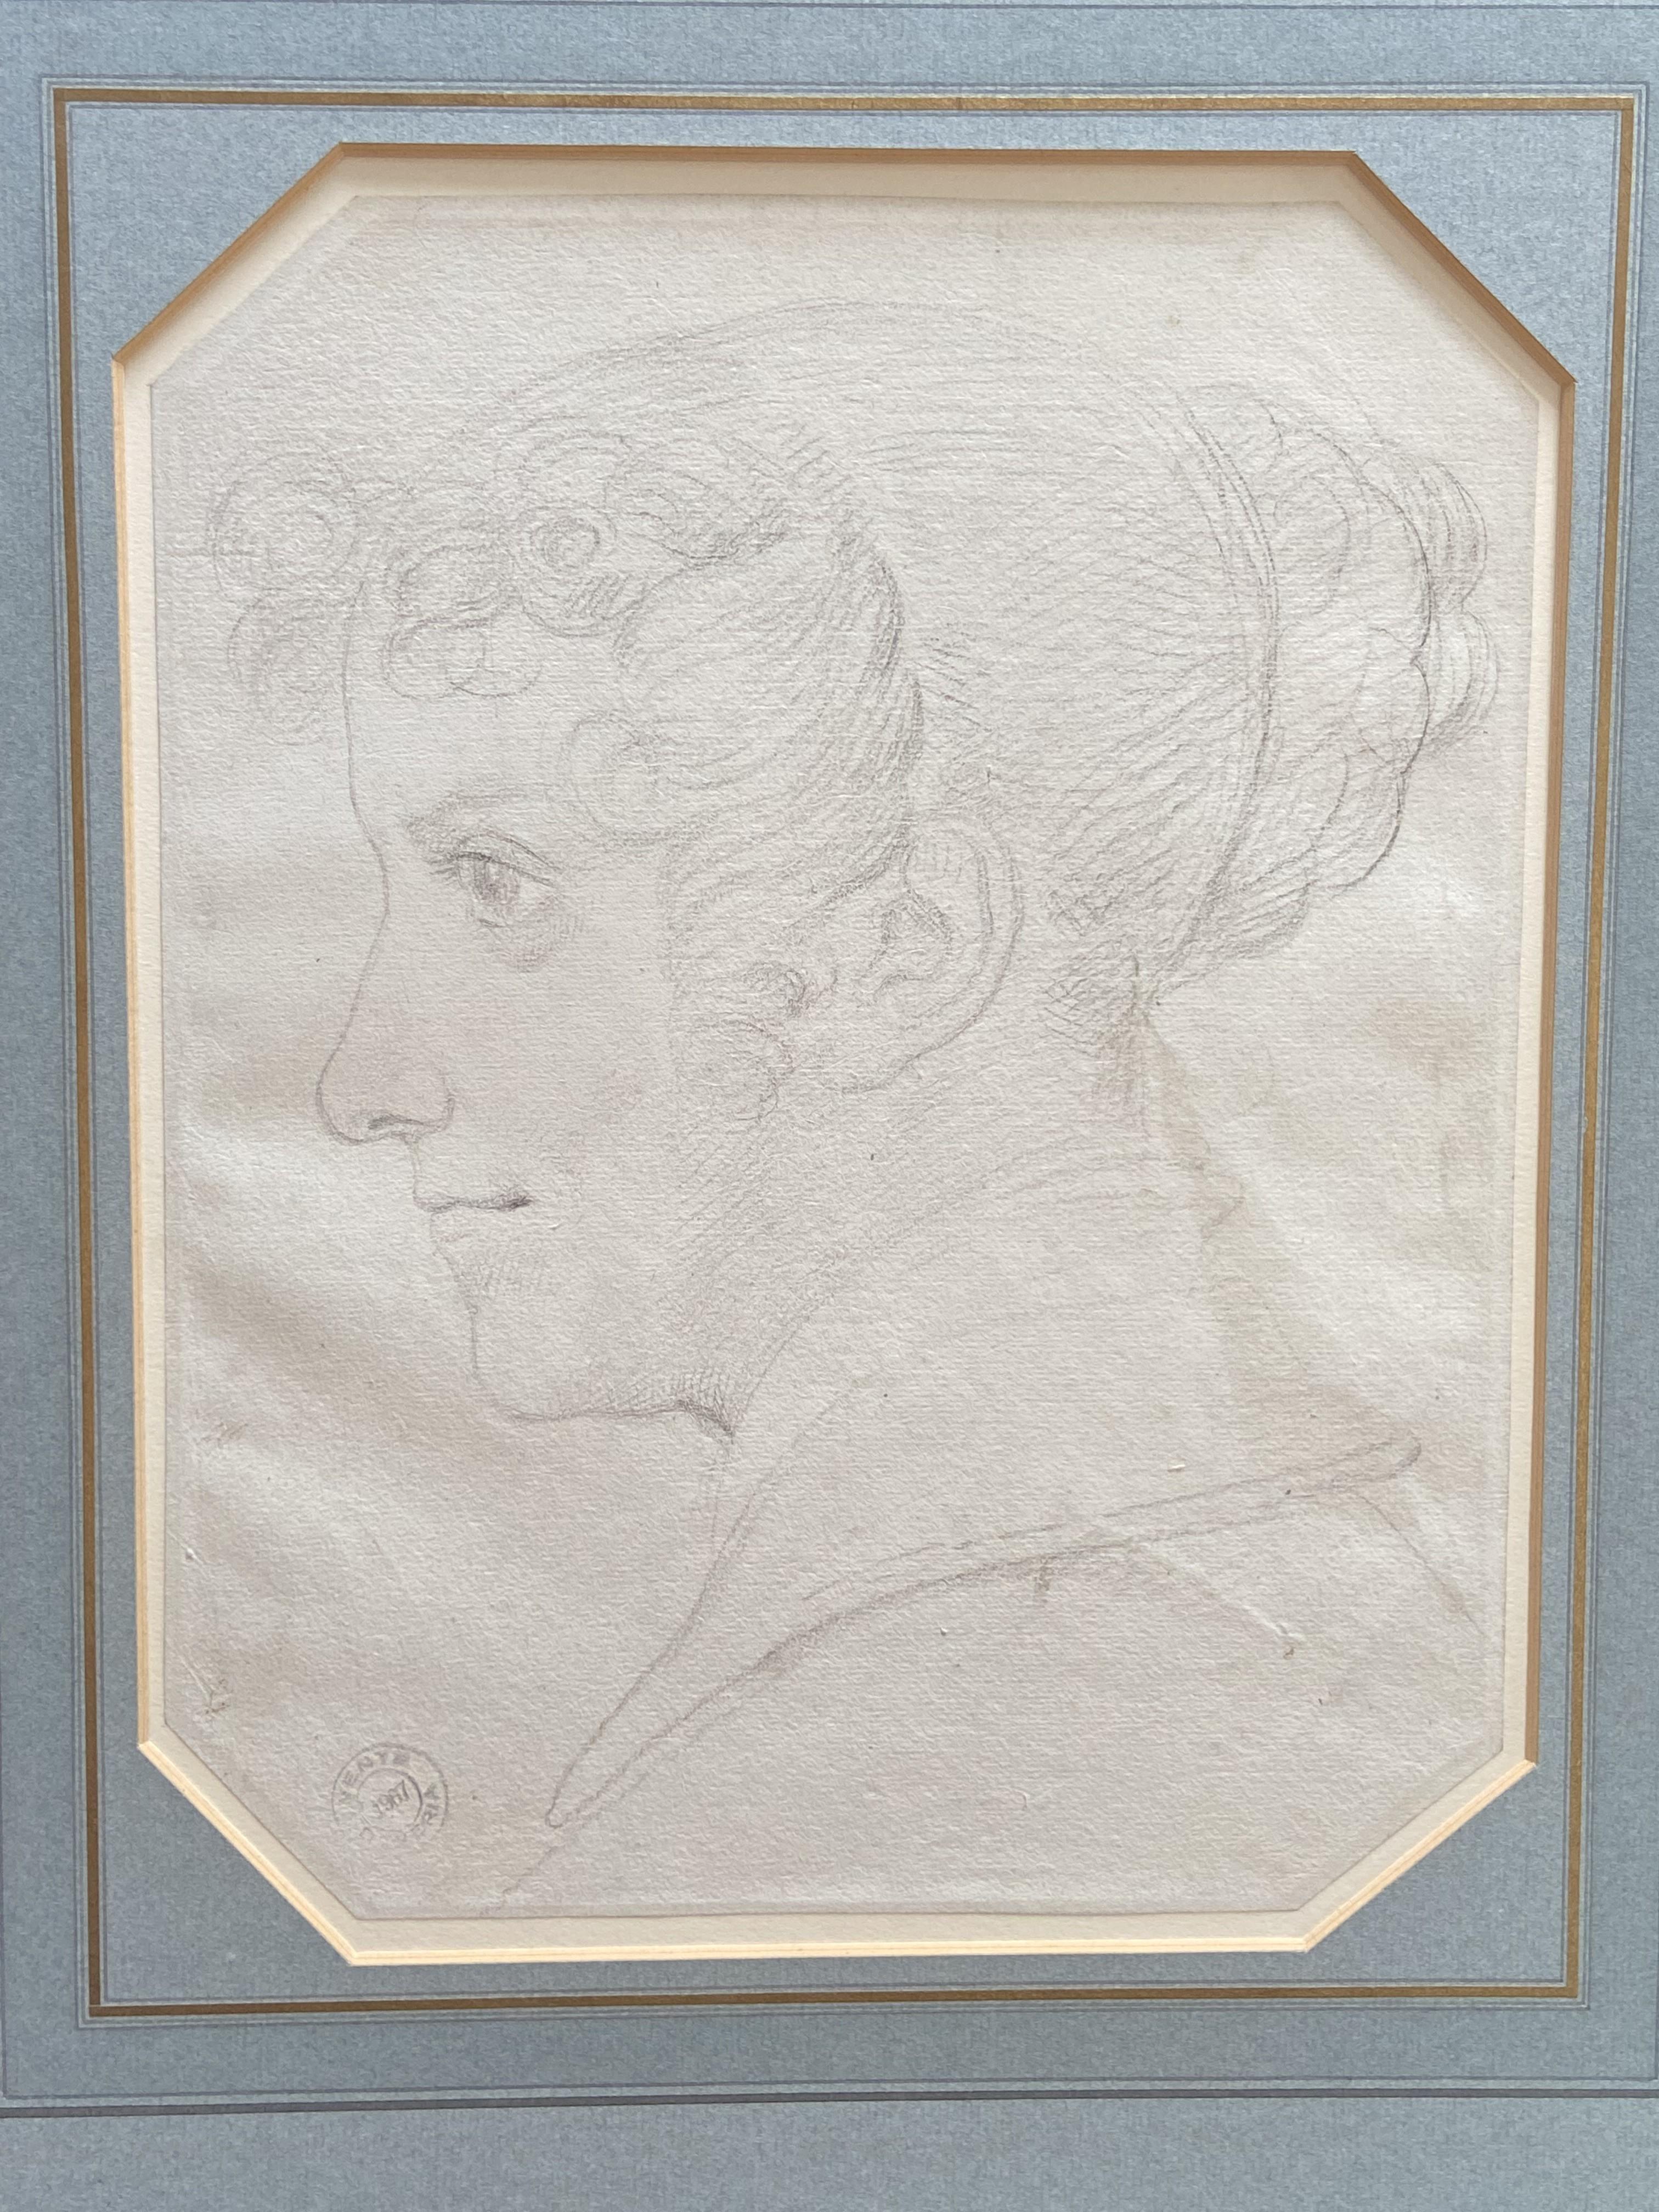 Achille Devéria (1800-1857) A young woman seen in profile, original drawing For Sale 4